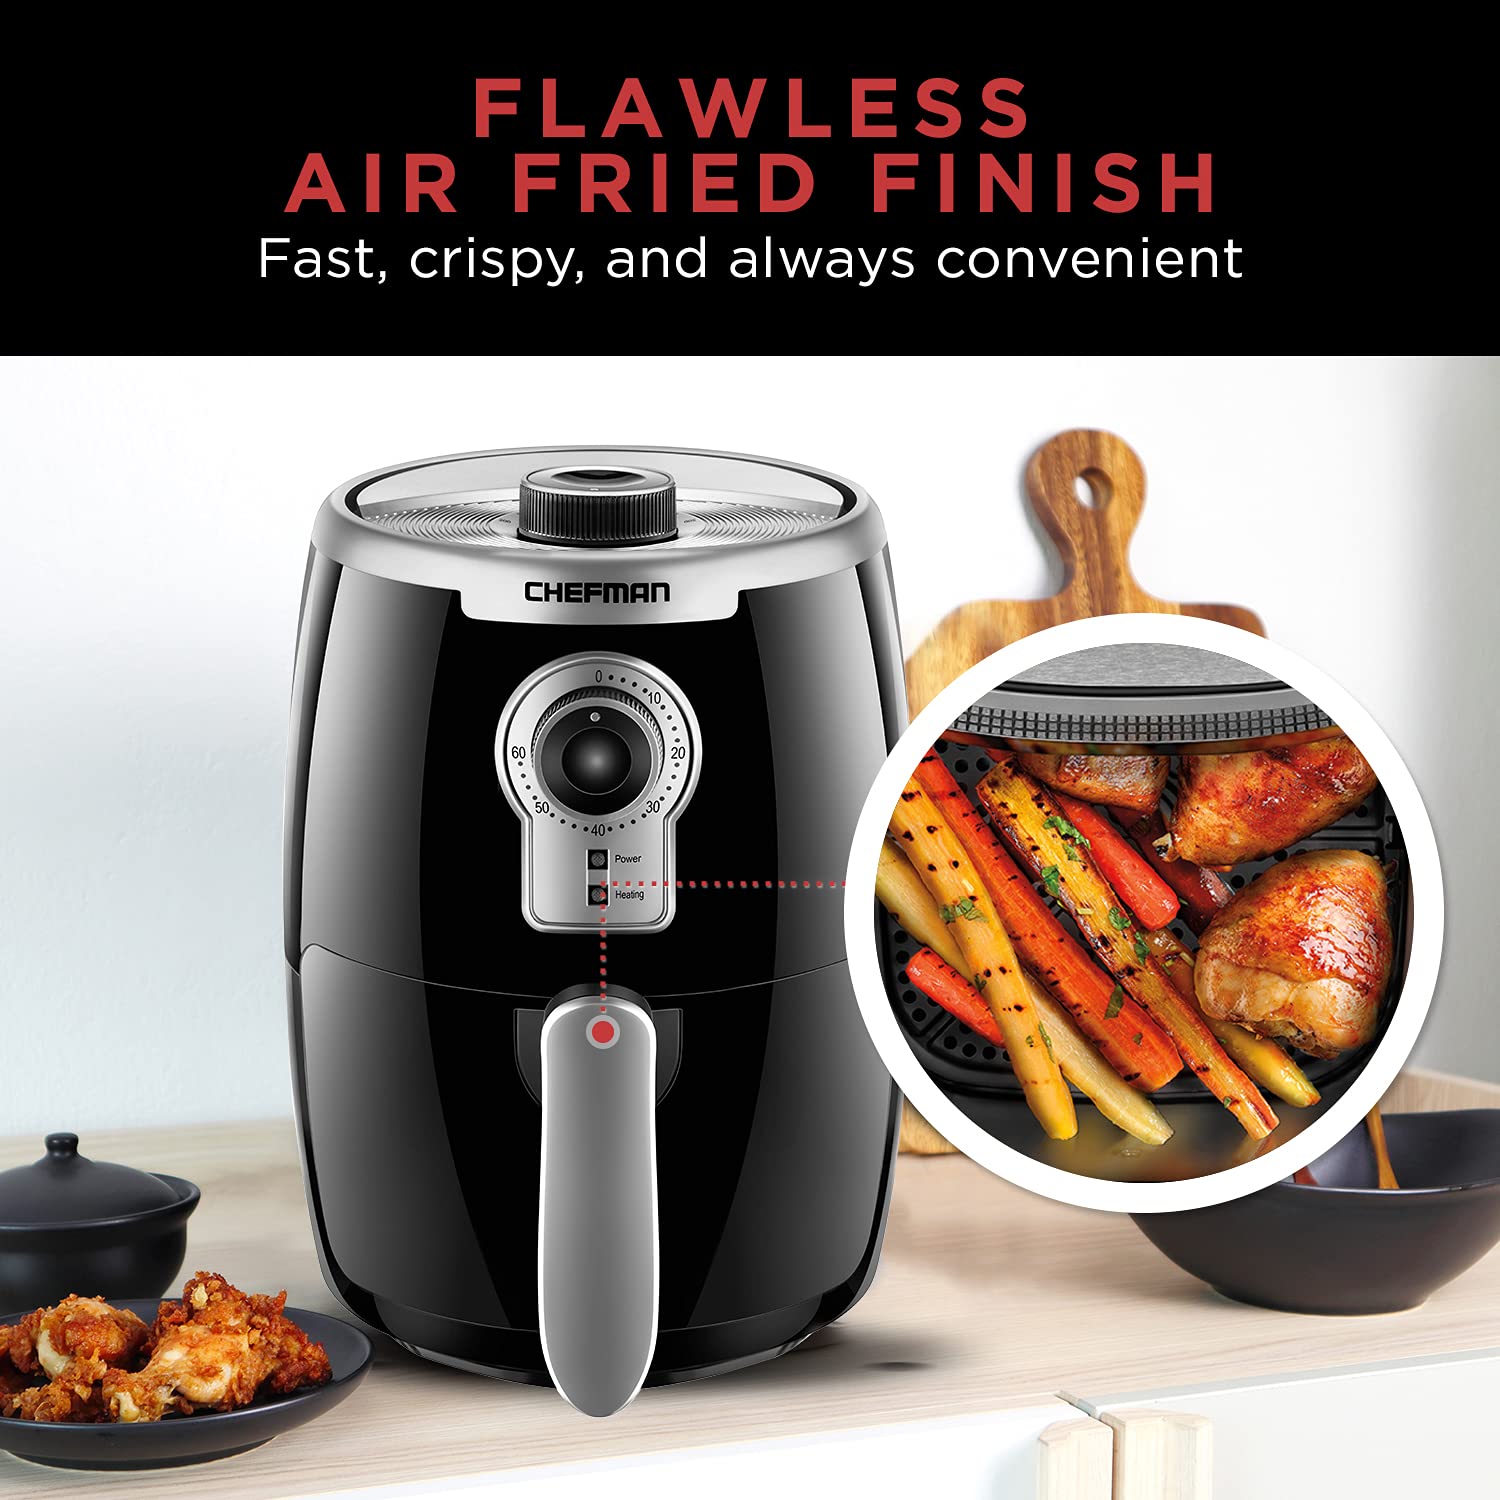 Chefman Small Compact Air Fryer Healthy Cooking, 2 Qt Nonstick, User Friendly and Adjustable Temperature Control w/ 60 Minute Timer & Auto Shutoff, Dishwasher Safe Basket, BPA-Free, 2 Quart, Black